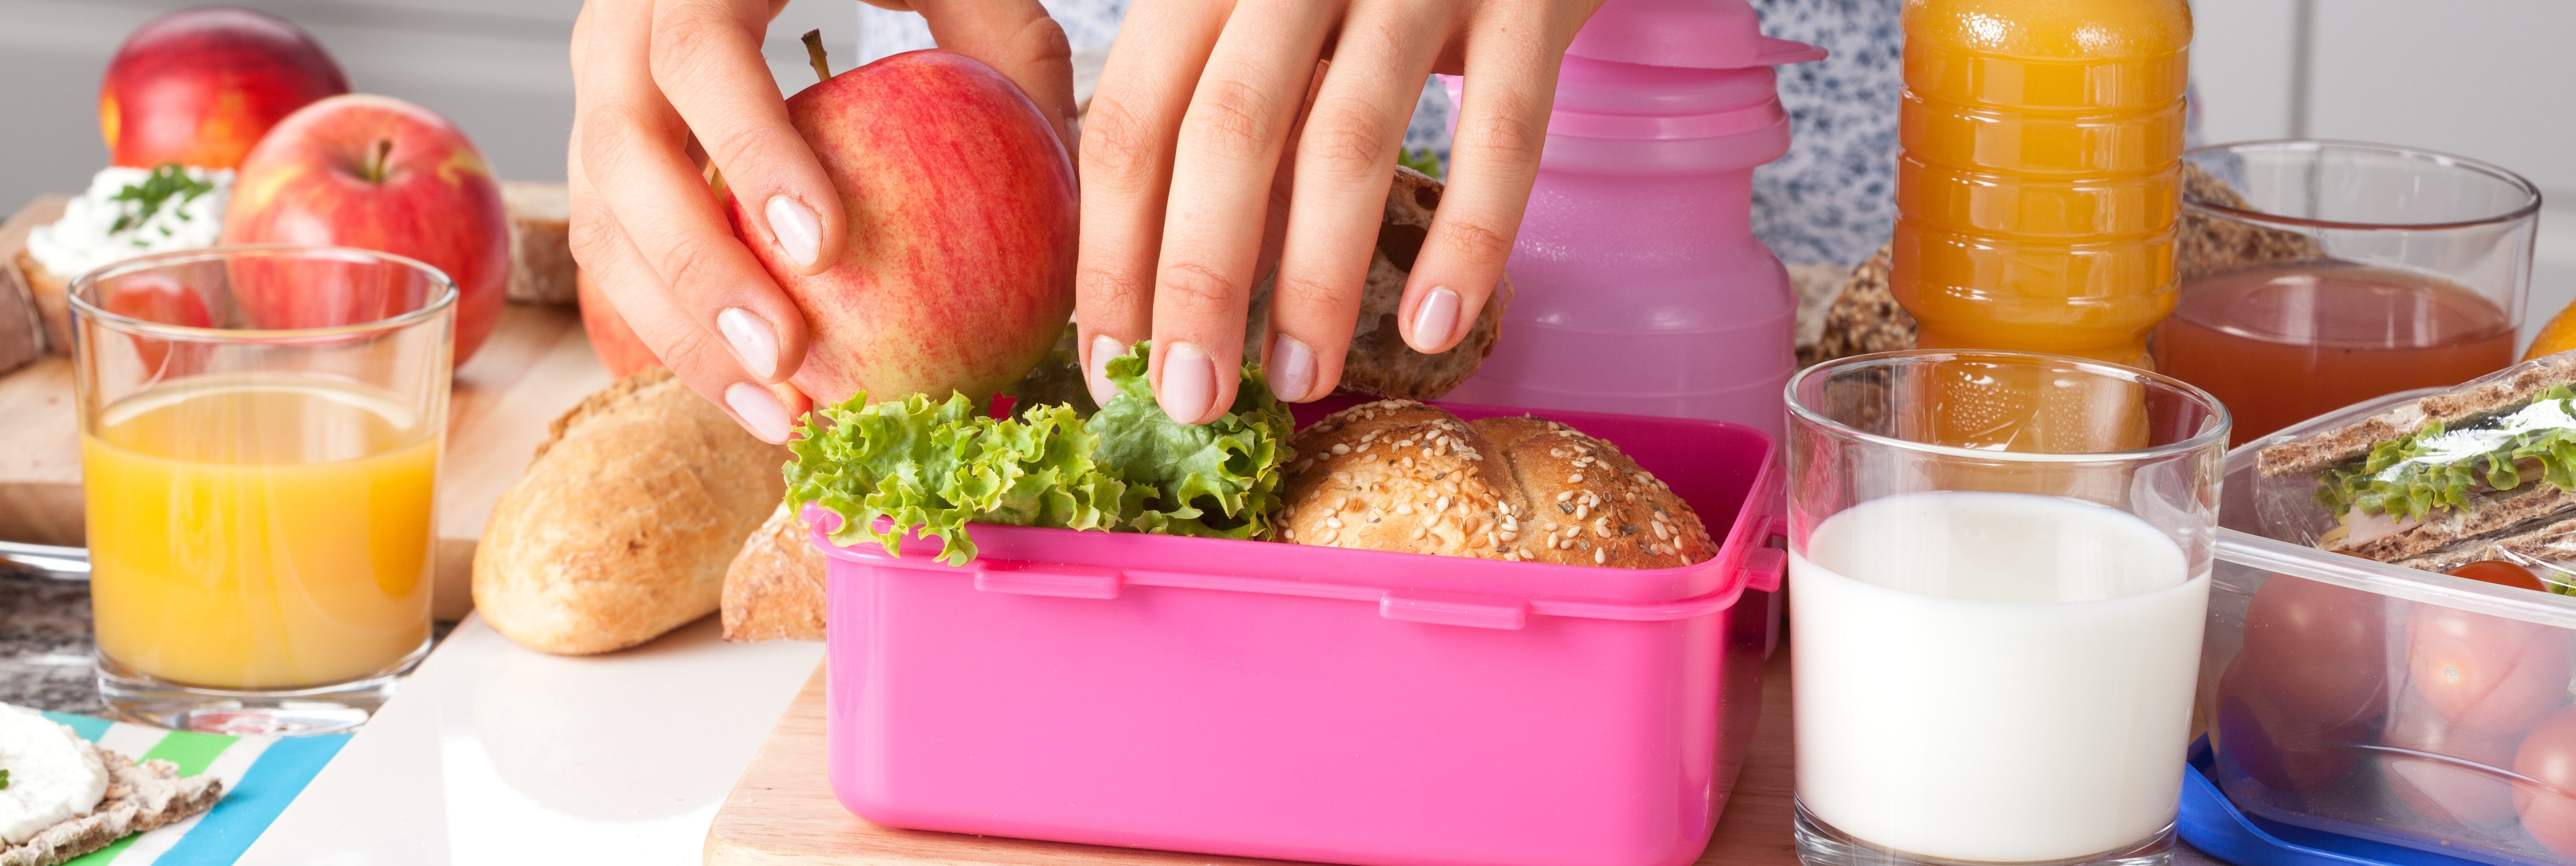 How to Build a Better Lunch Box for Kids